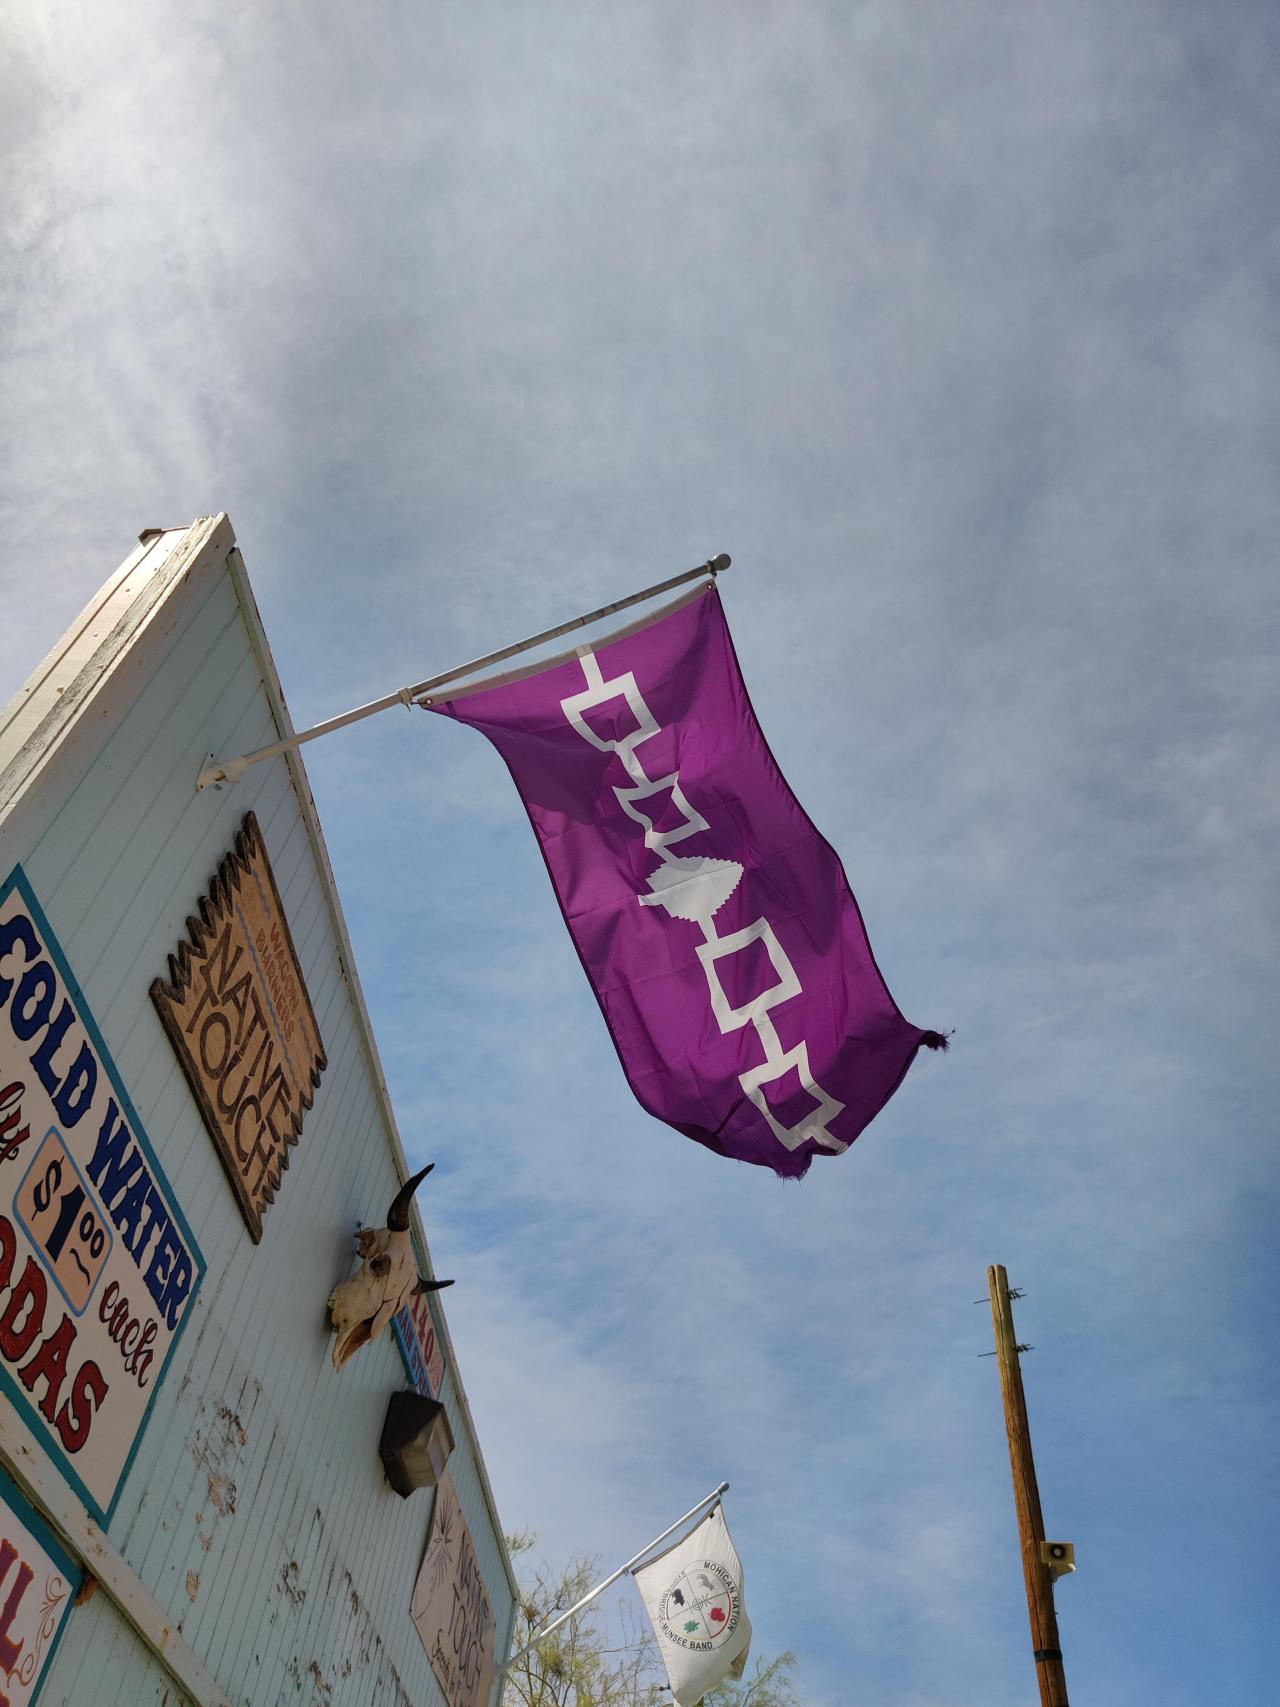 Iroquois Confederacy found in Oatman, Arizonafrom /r/vexillology 

Top comment: Oh damn thats cool. A little far from home 🤔 #Iroquois#Confederacy#found#Oatman#Arizona#flags#vexillology